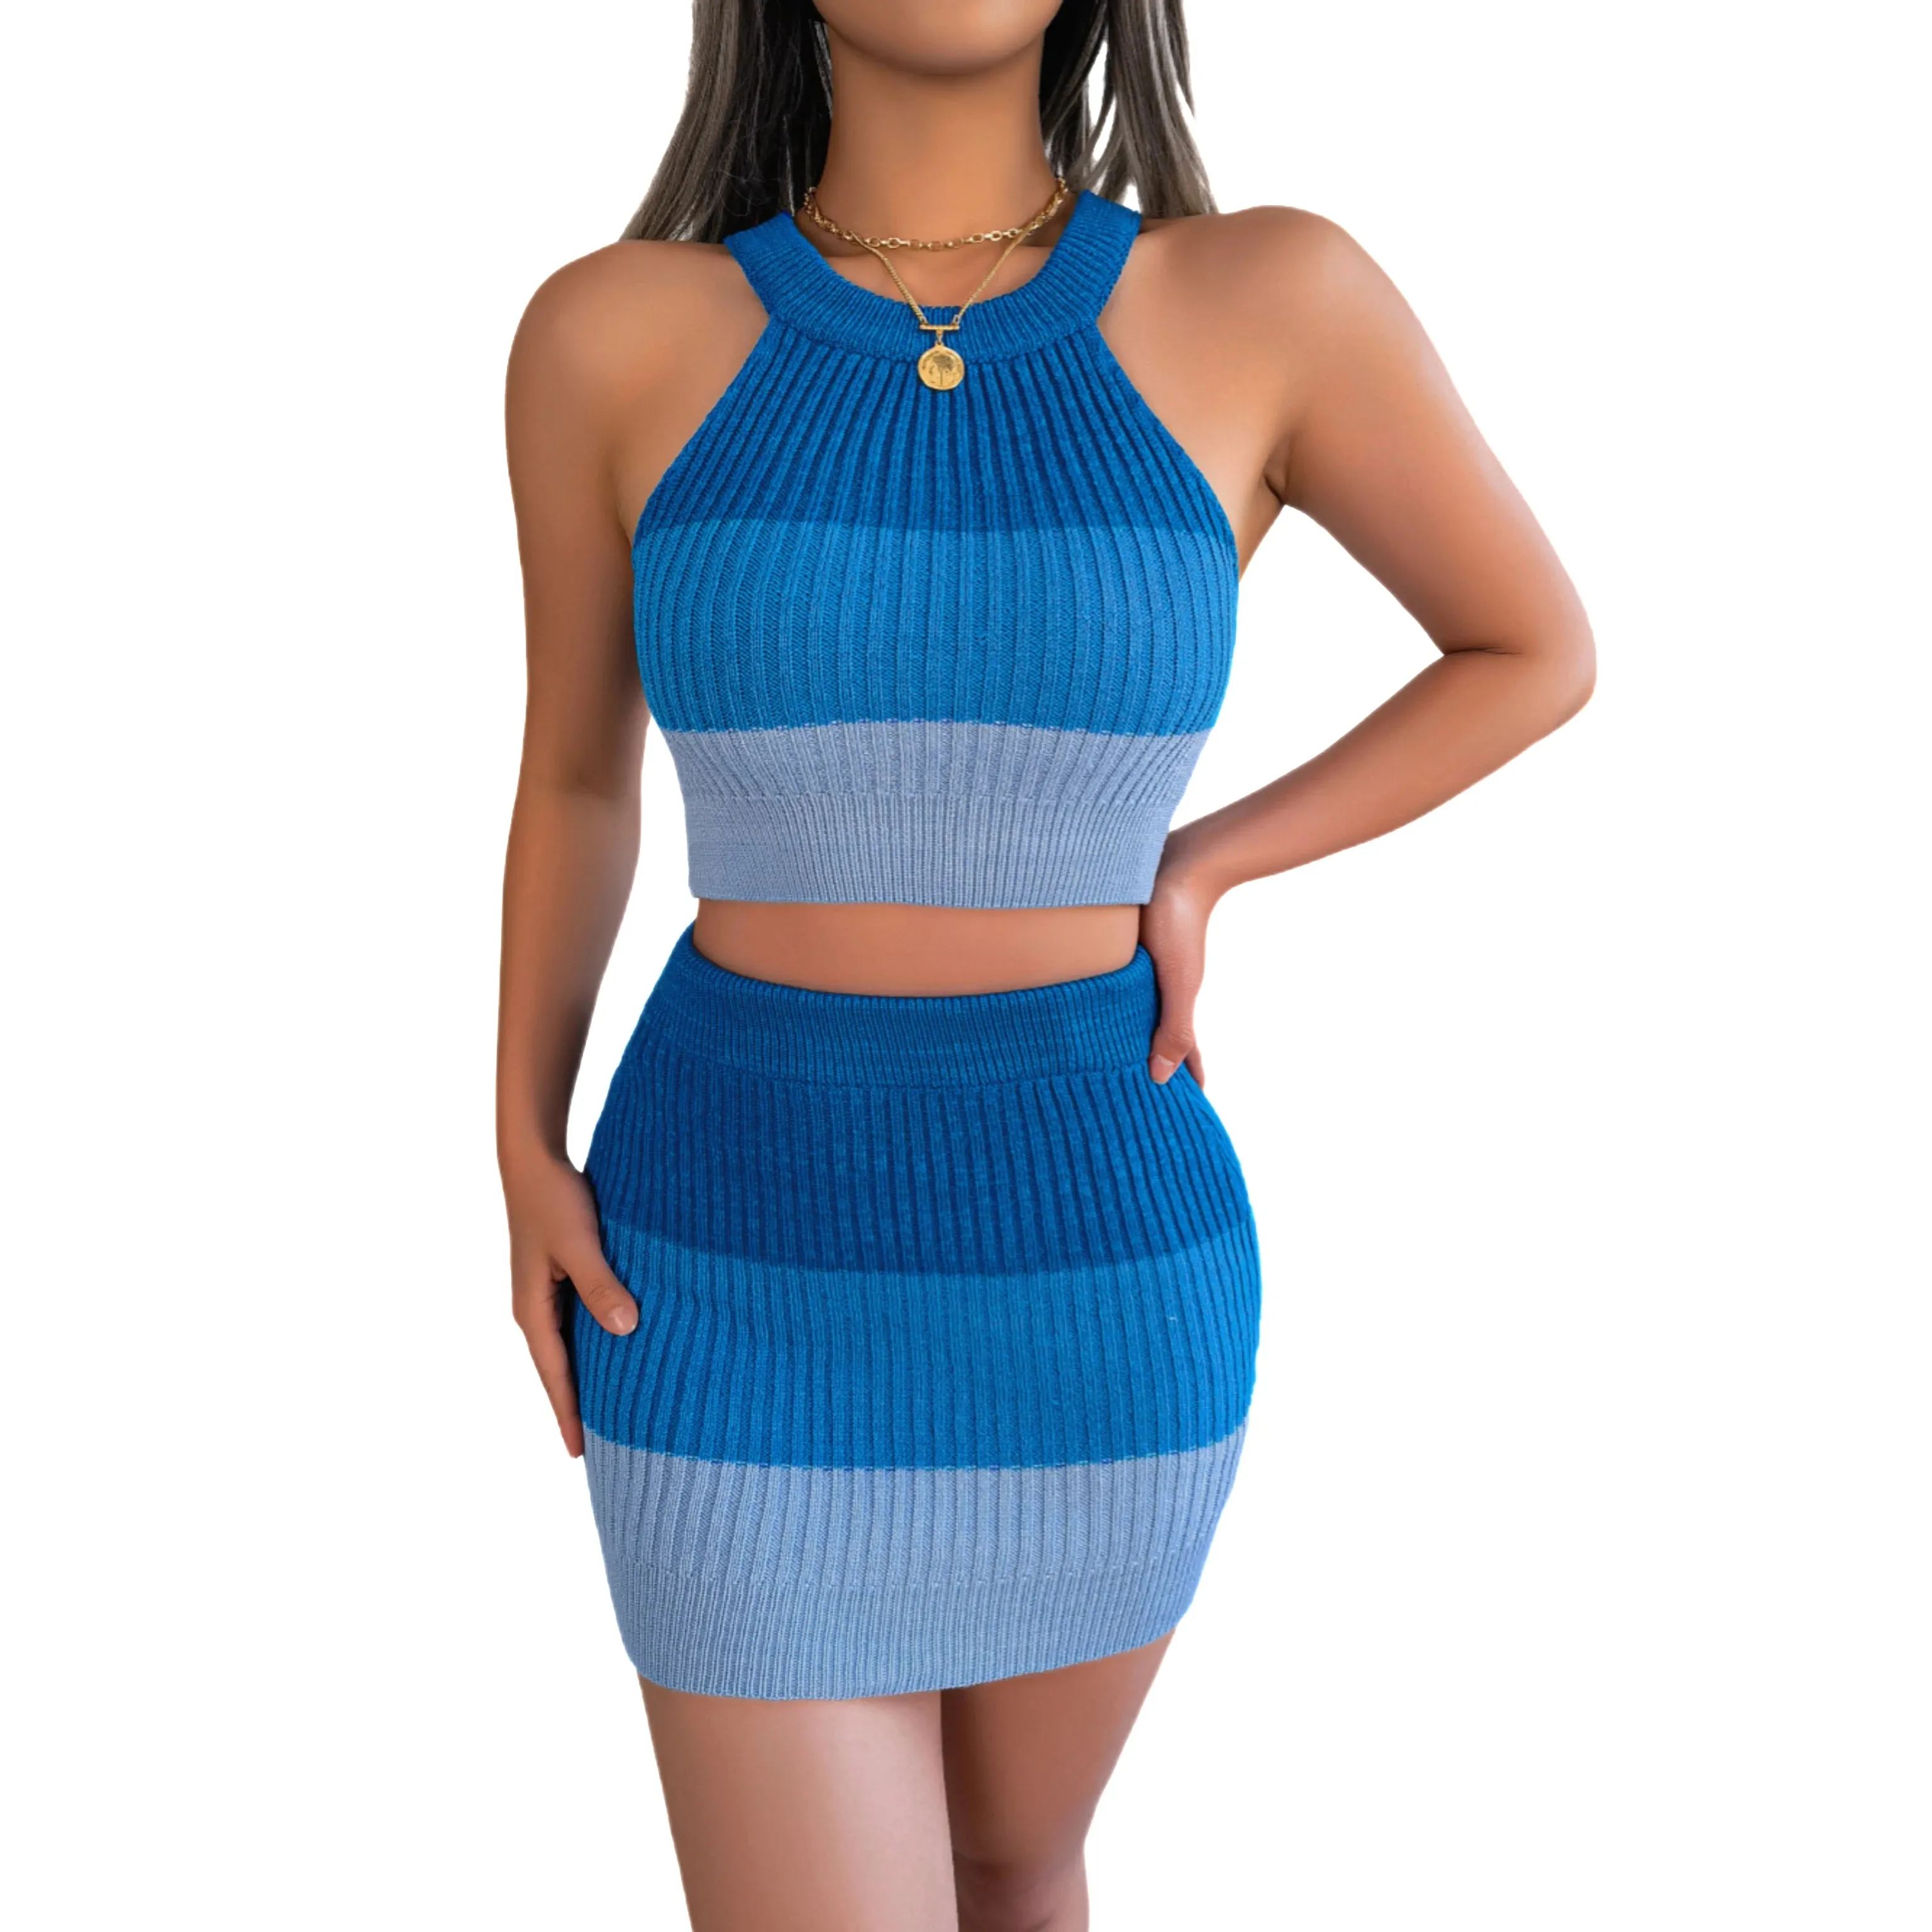 New Arrival Color Block Knitted Two-piece Set Crop Halter Top and Body-con Skirt Outfit Sweater suit for Women Clothing